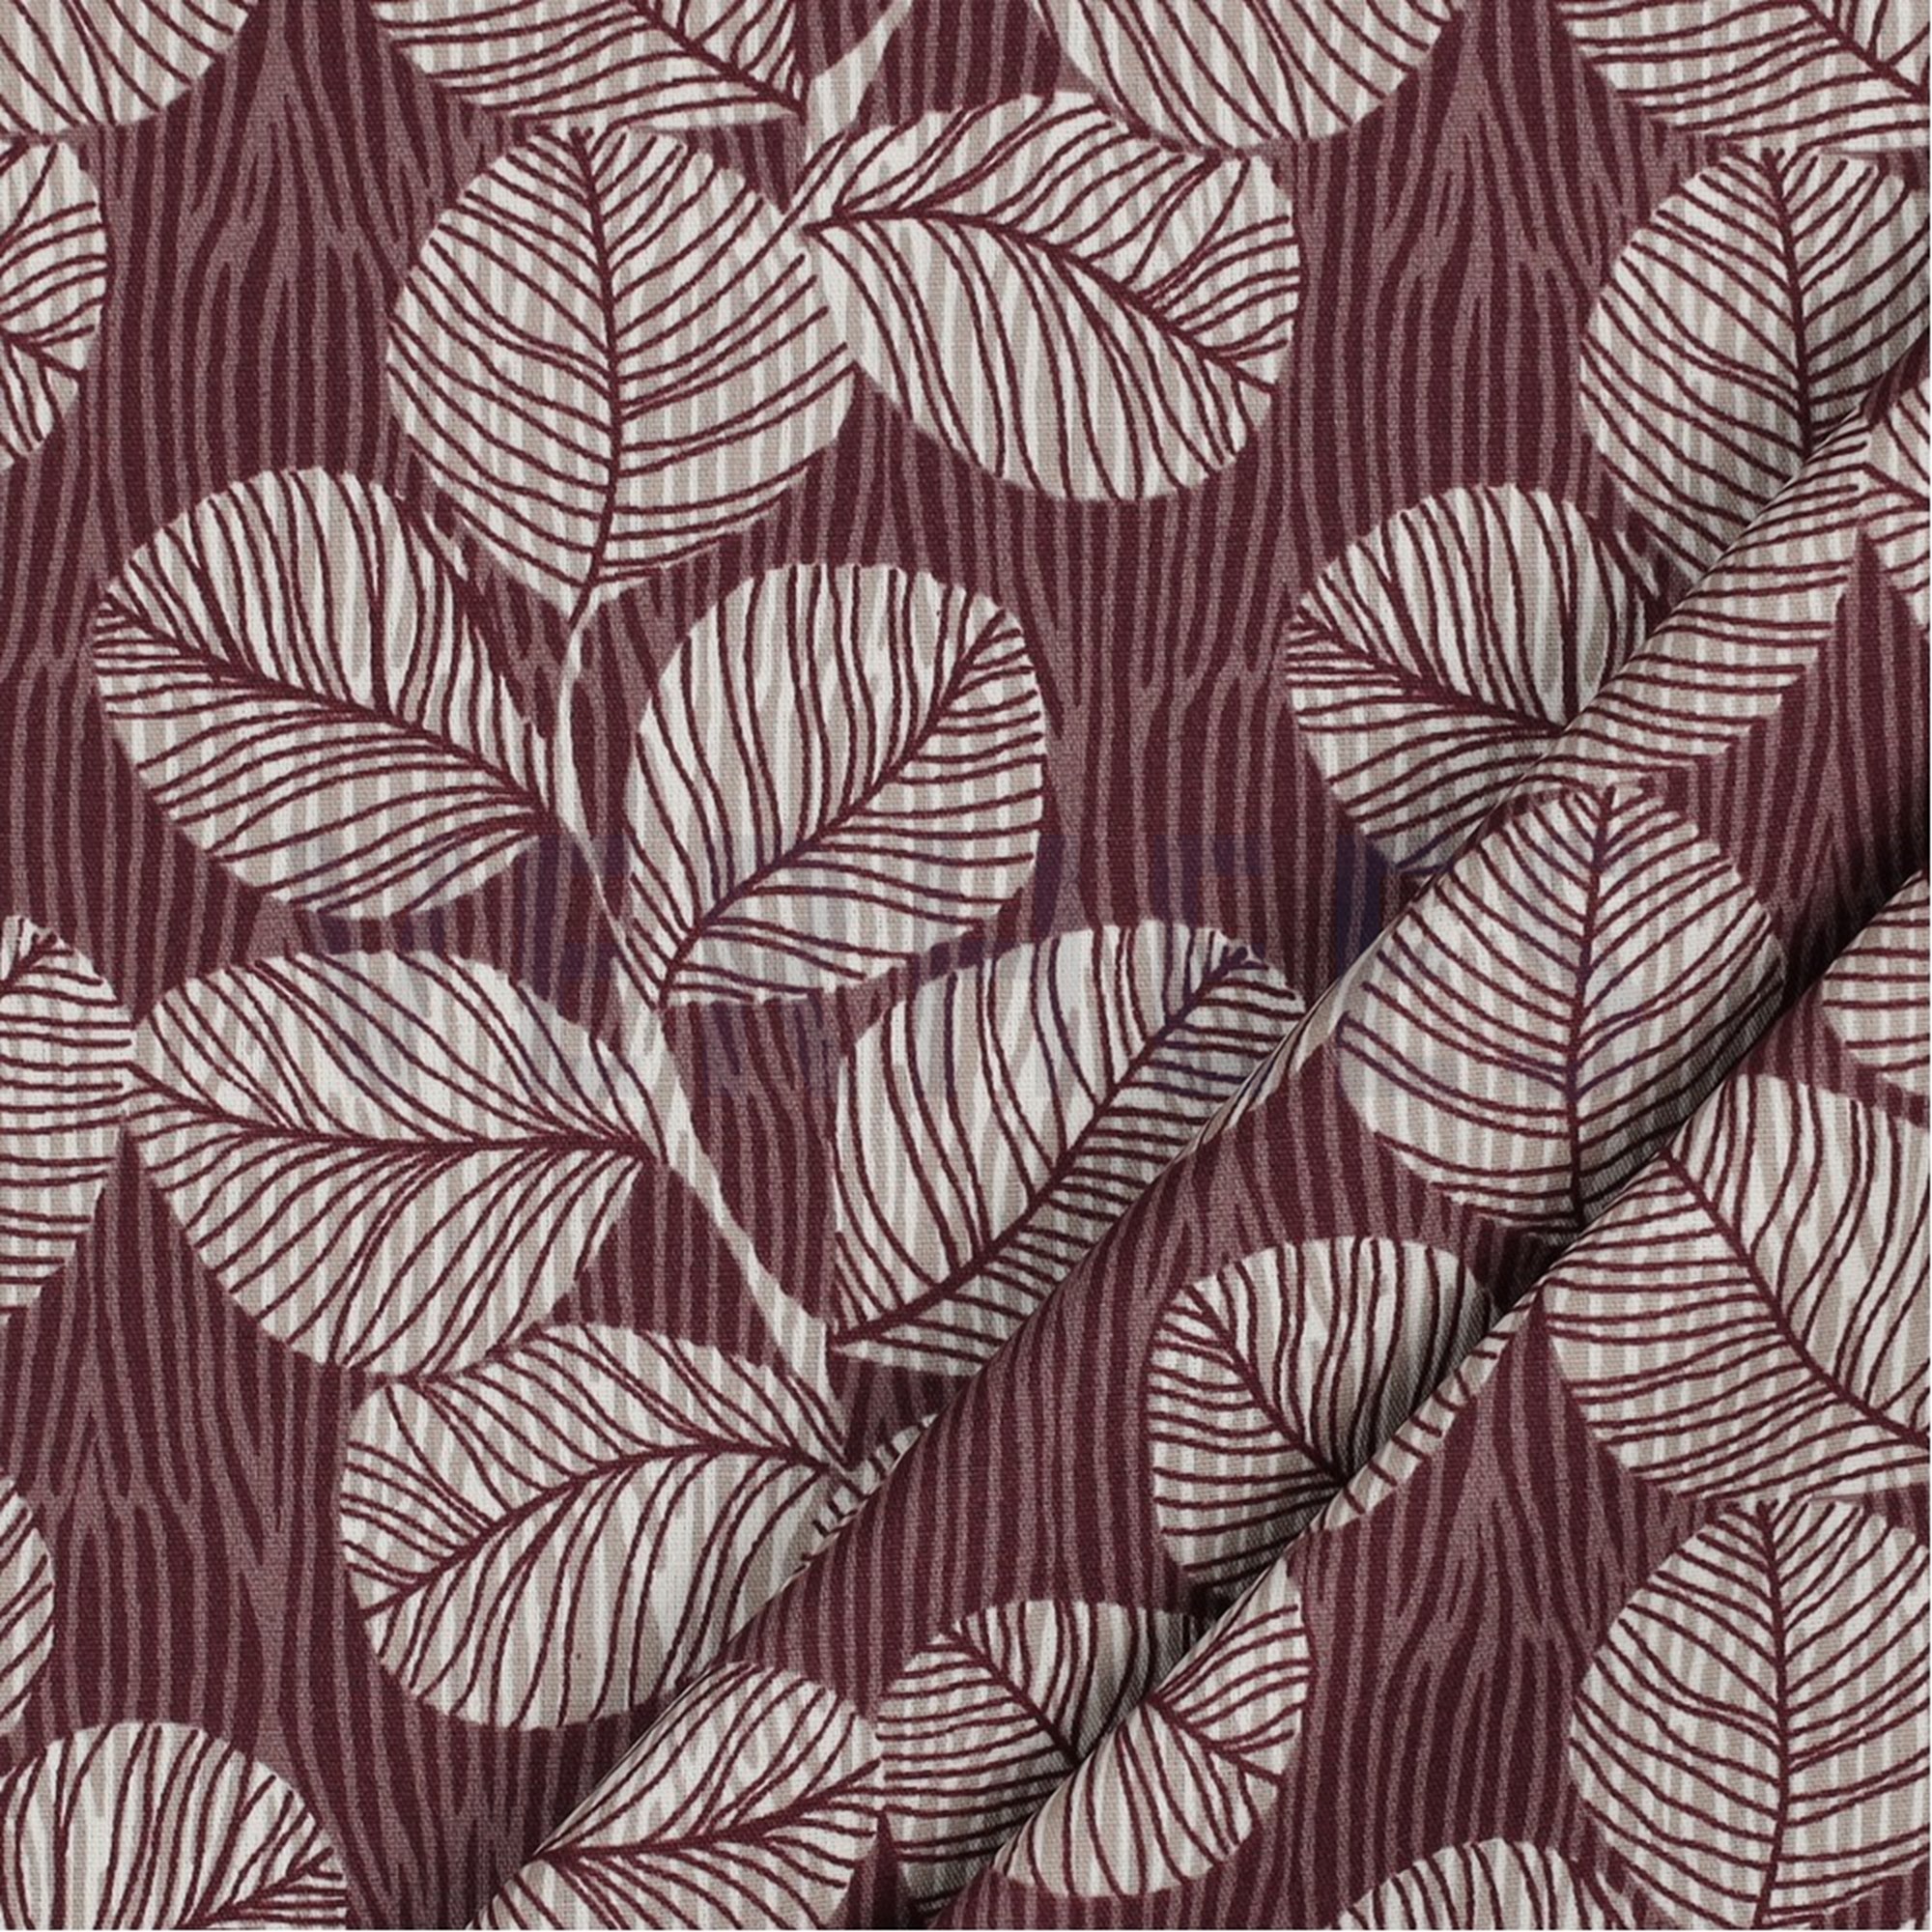 COATED COTTON LEAVES MULBERRY (high resolution) #3